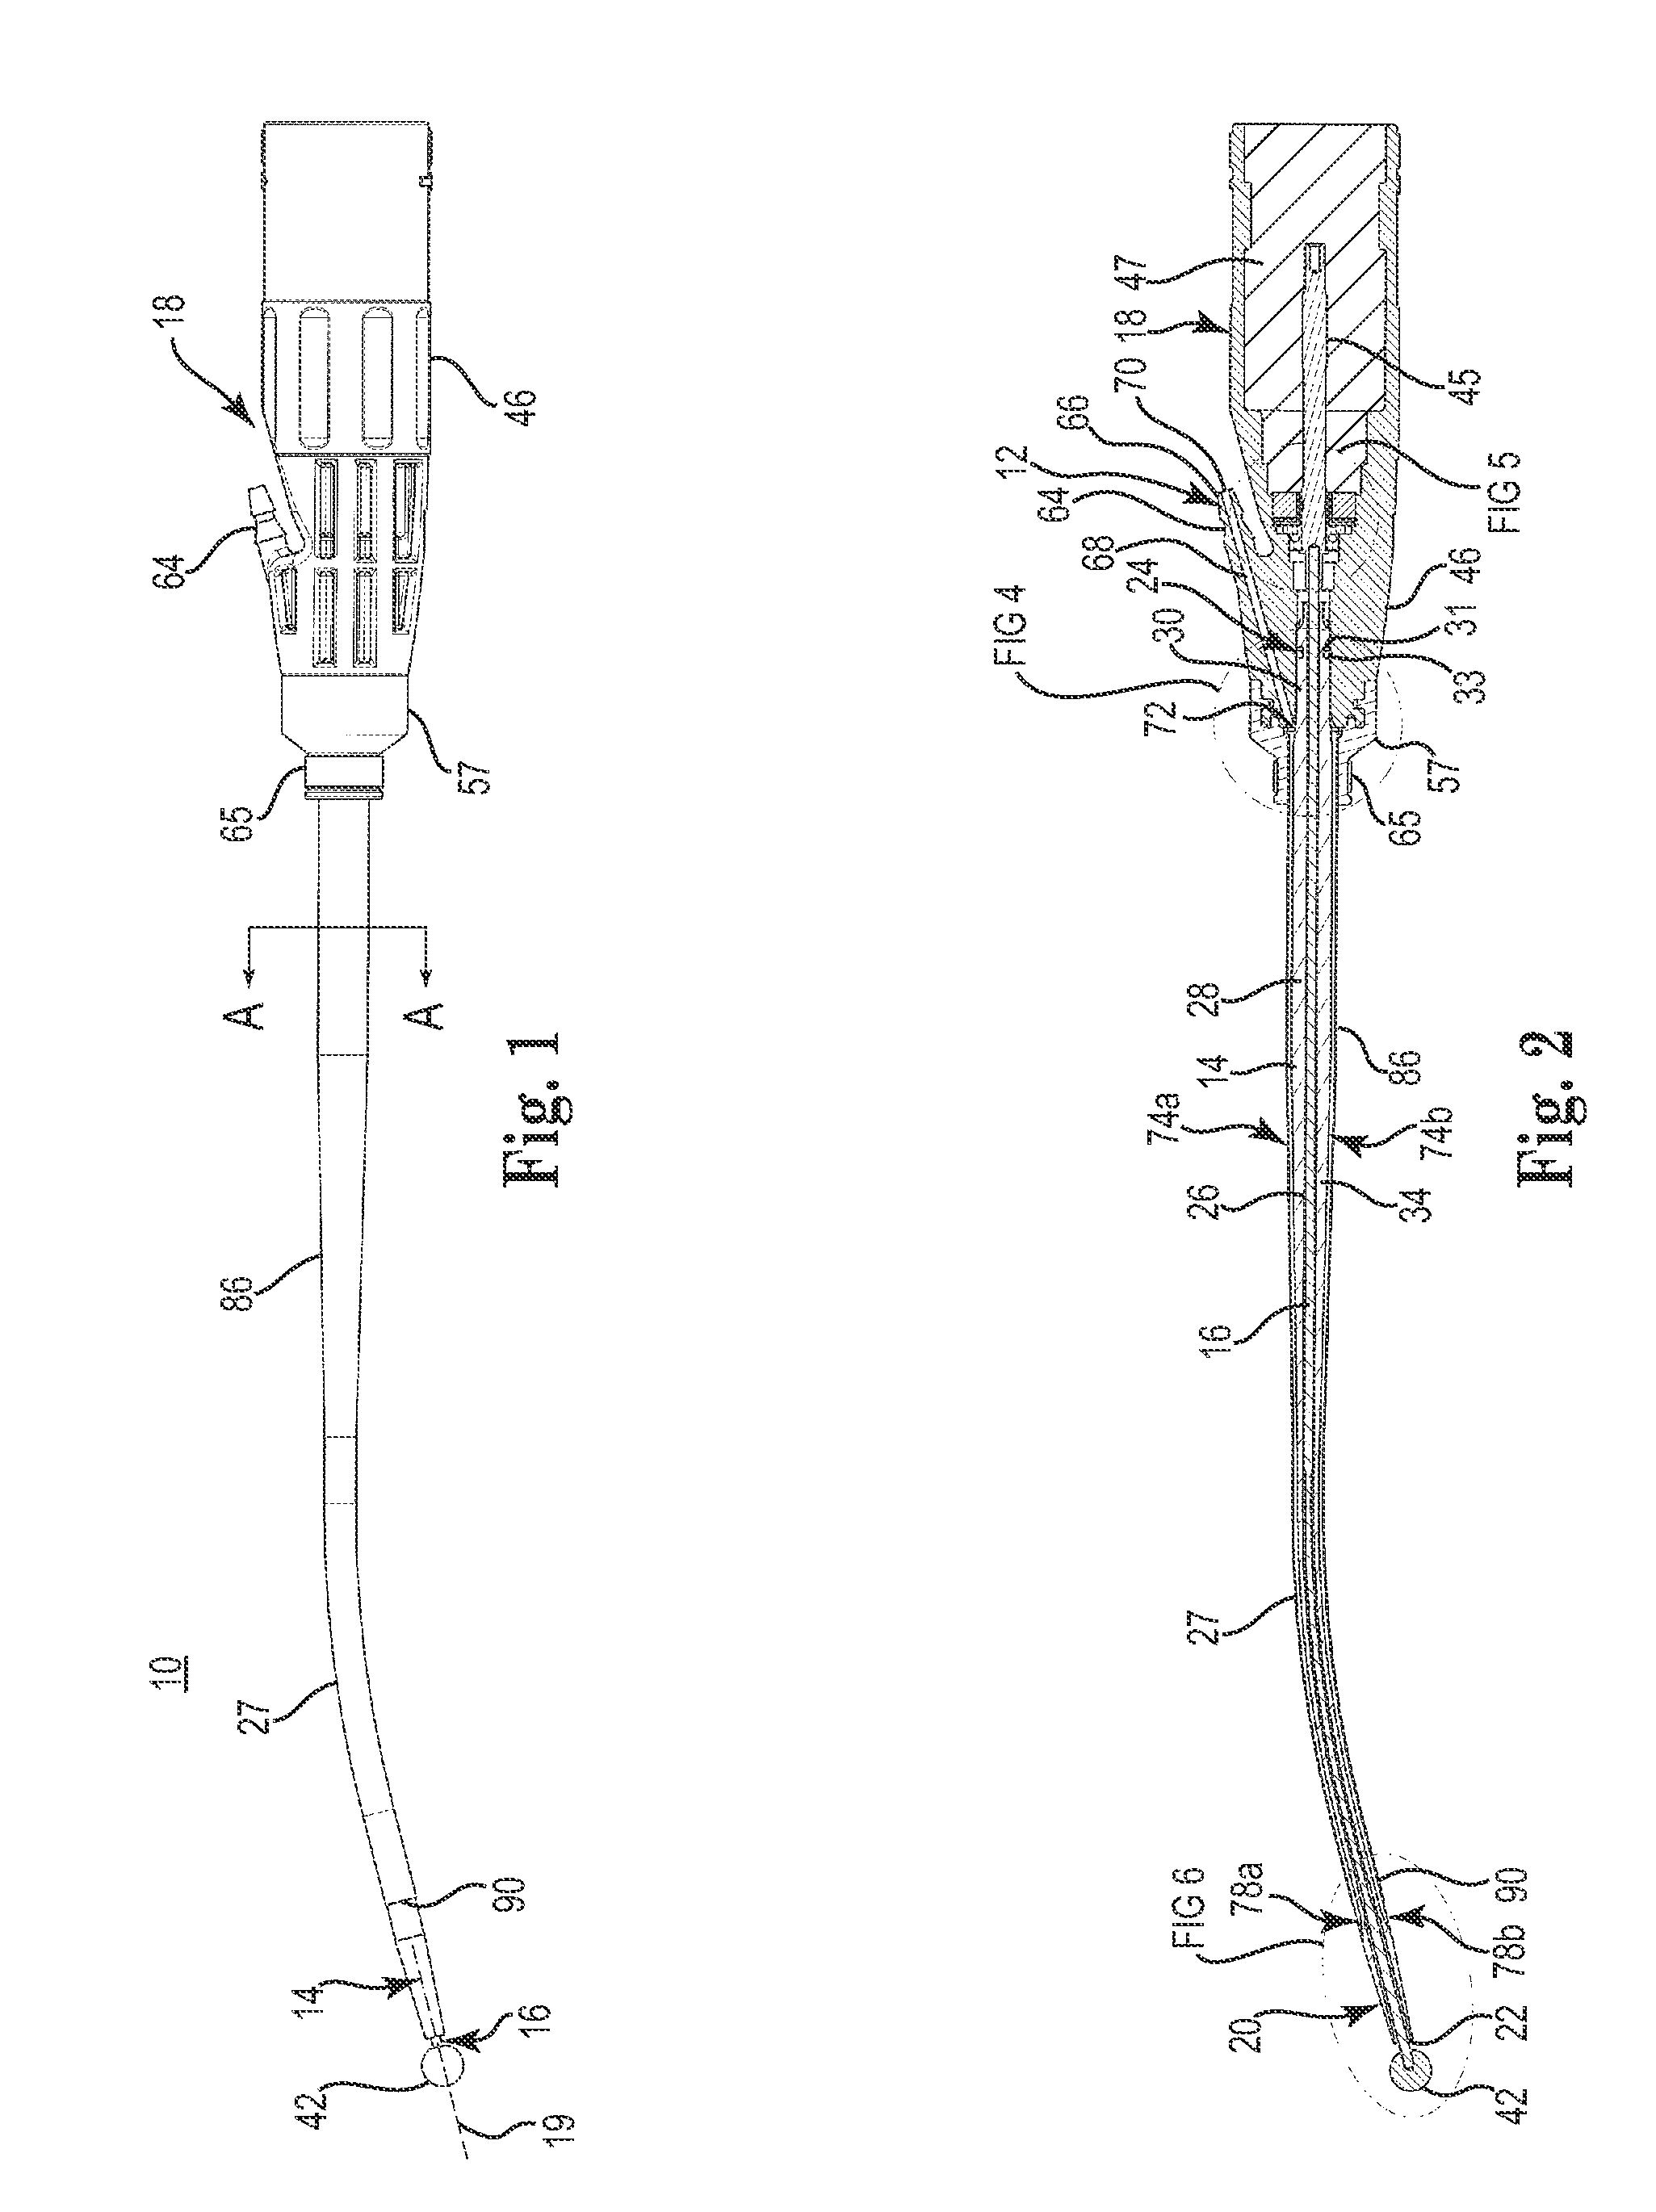 Powered surgical tissue cutting instrument having an irrigation system